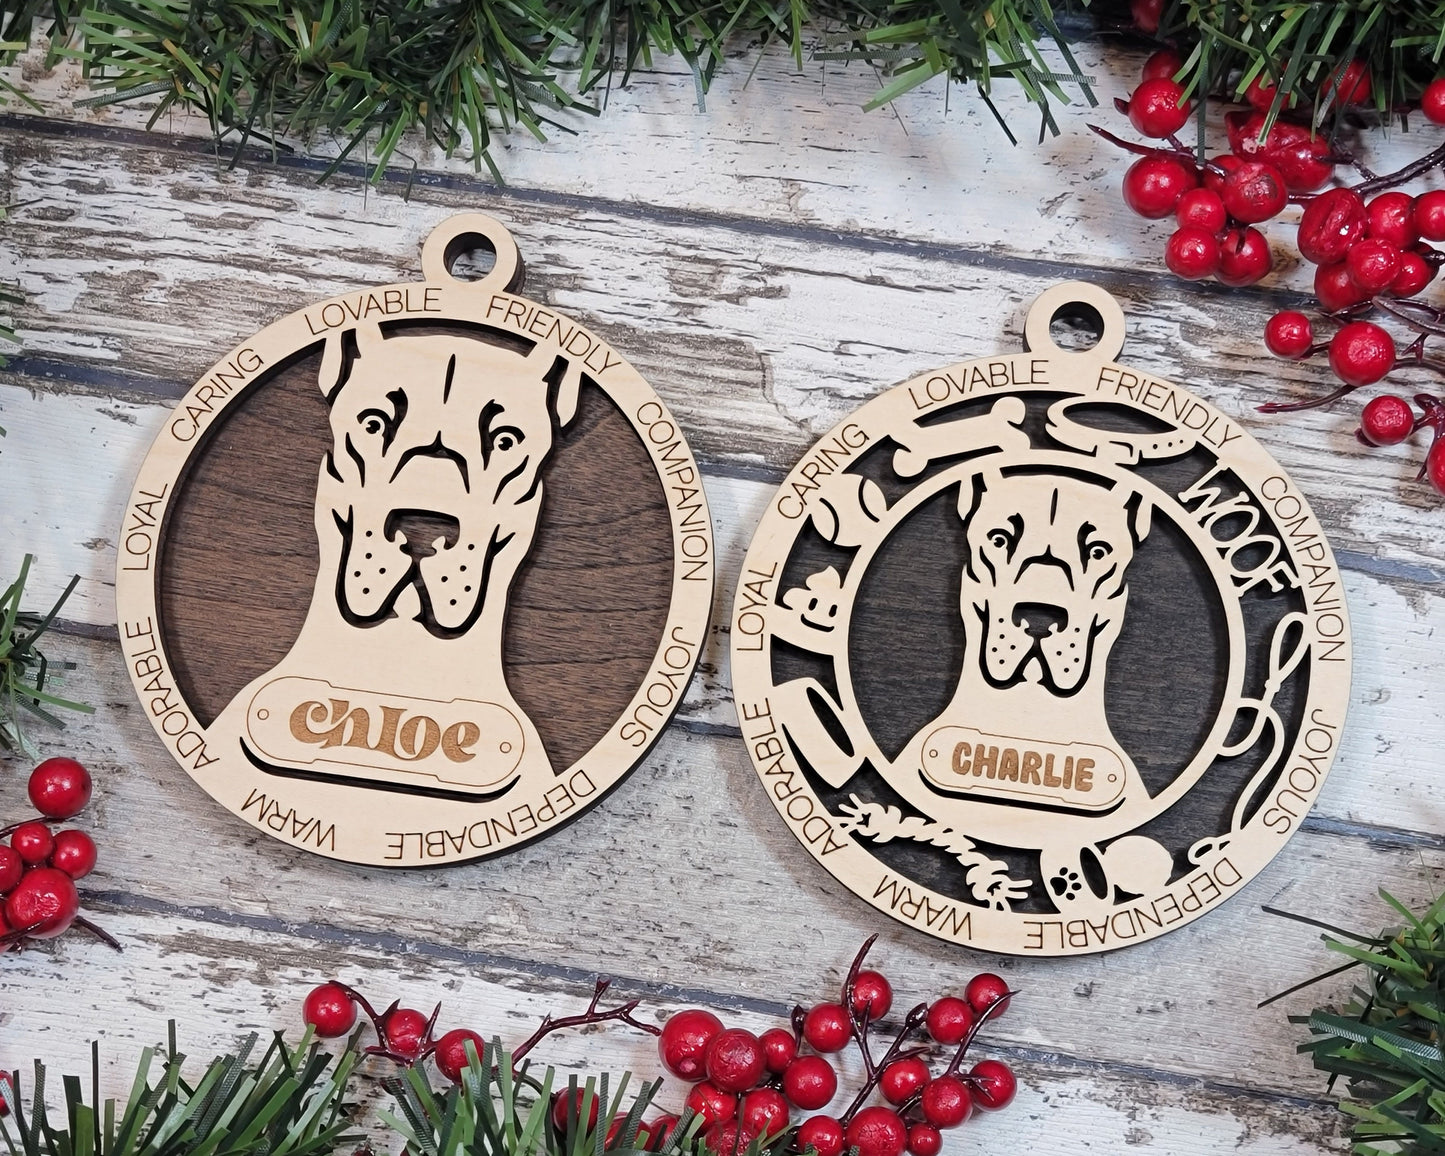 Great Dane - Adorable Dog Ornaments - 2 Ornaments included - SVG, PDF, AI File Download - Sized for Glowforge